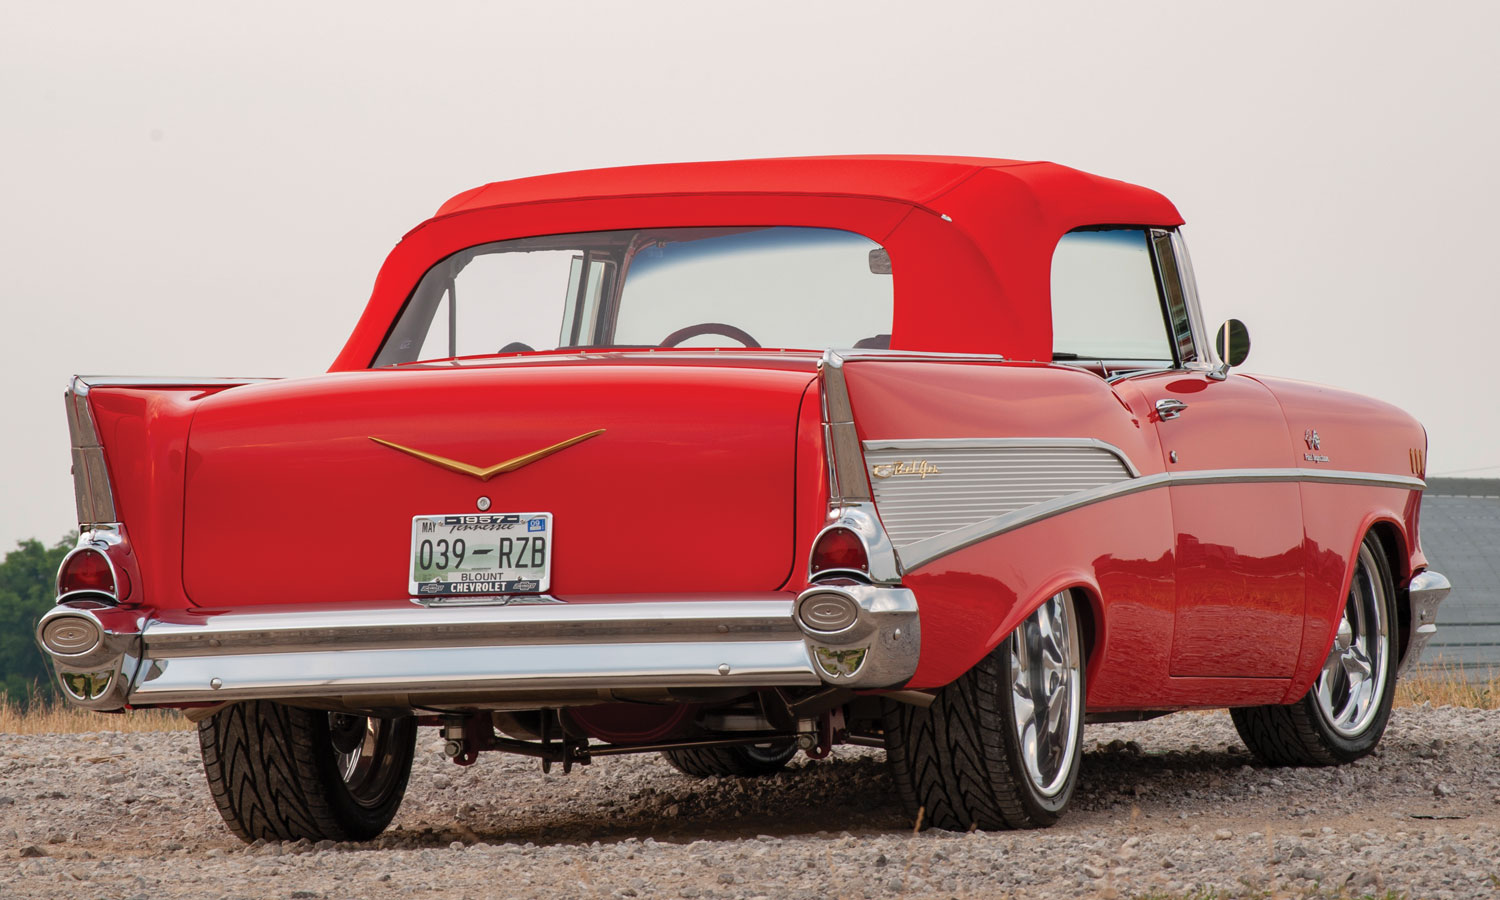 1957 Chevy Bel Air back view